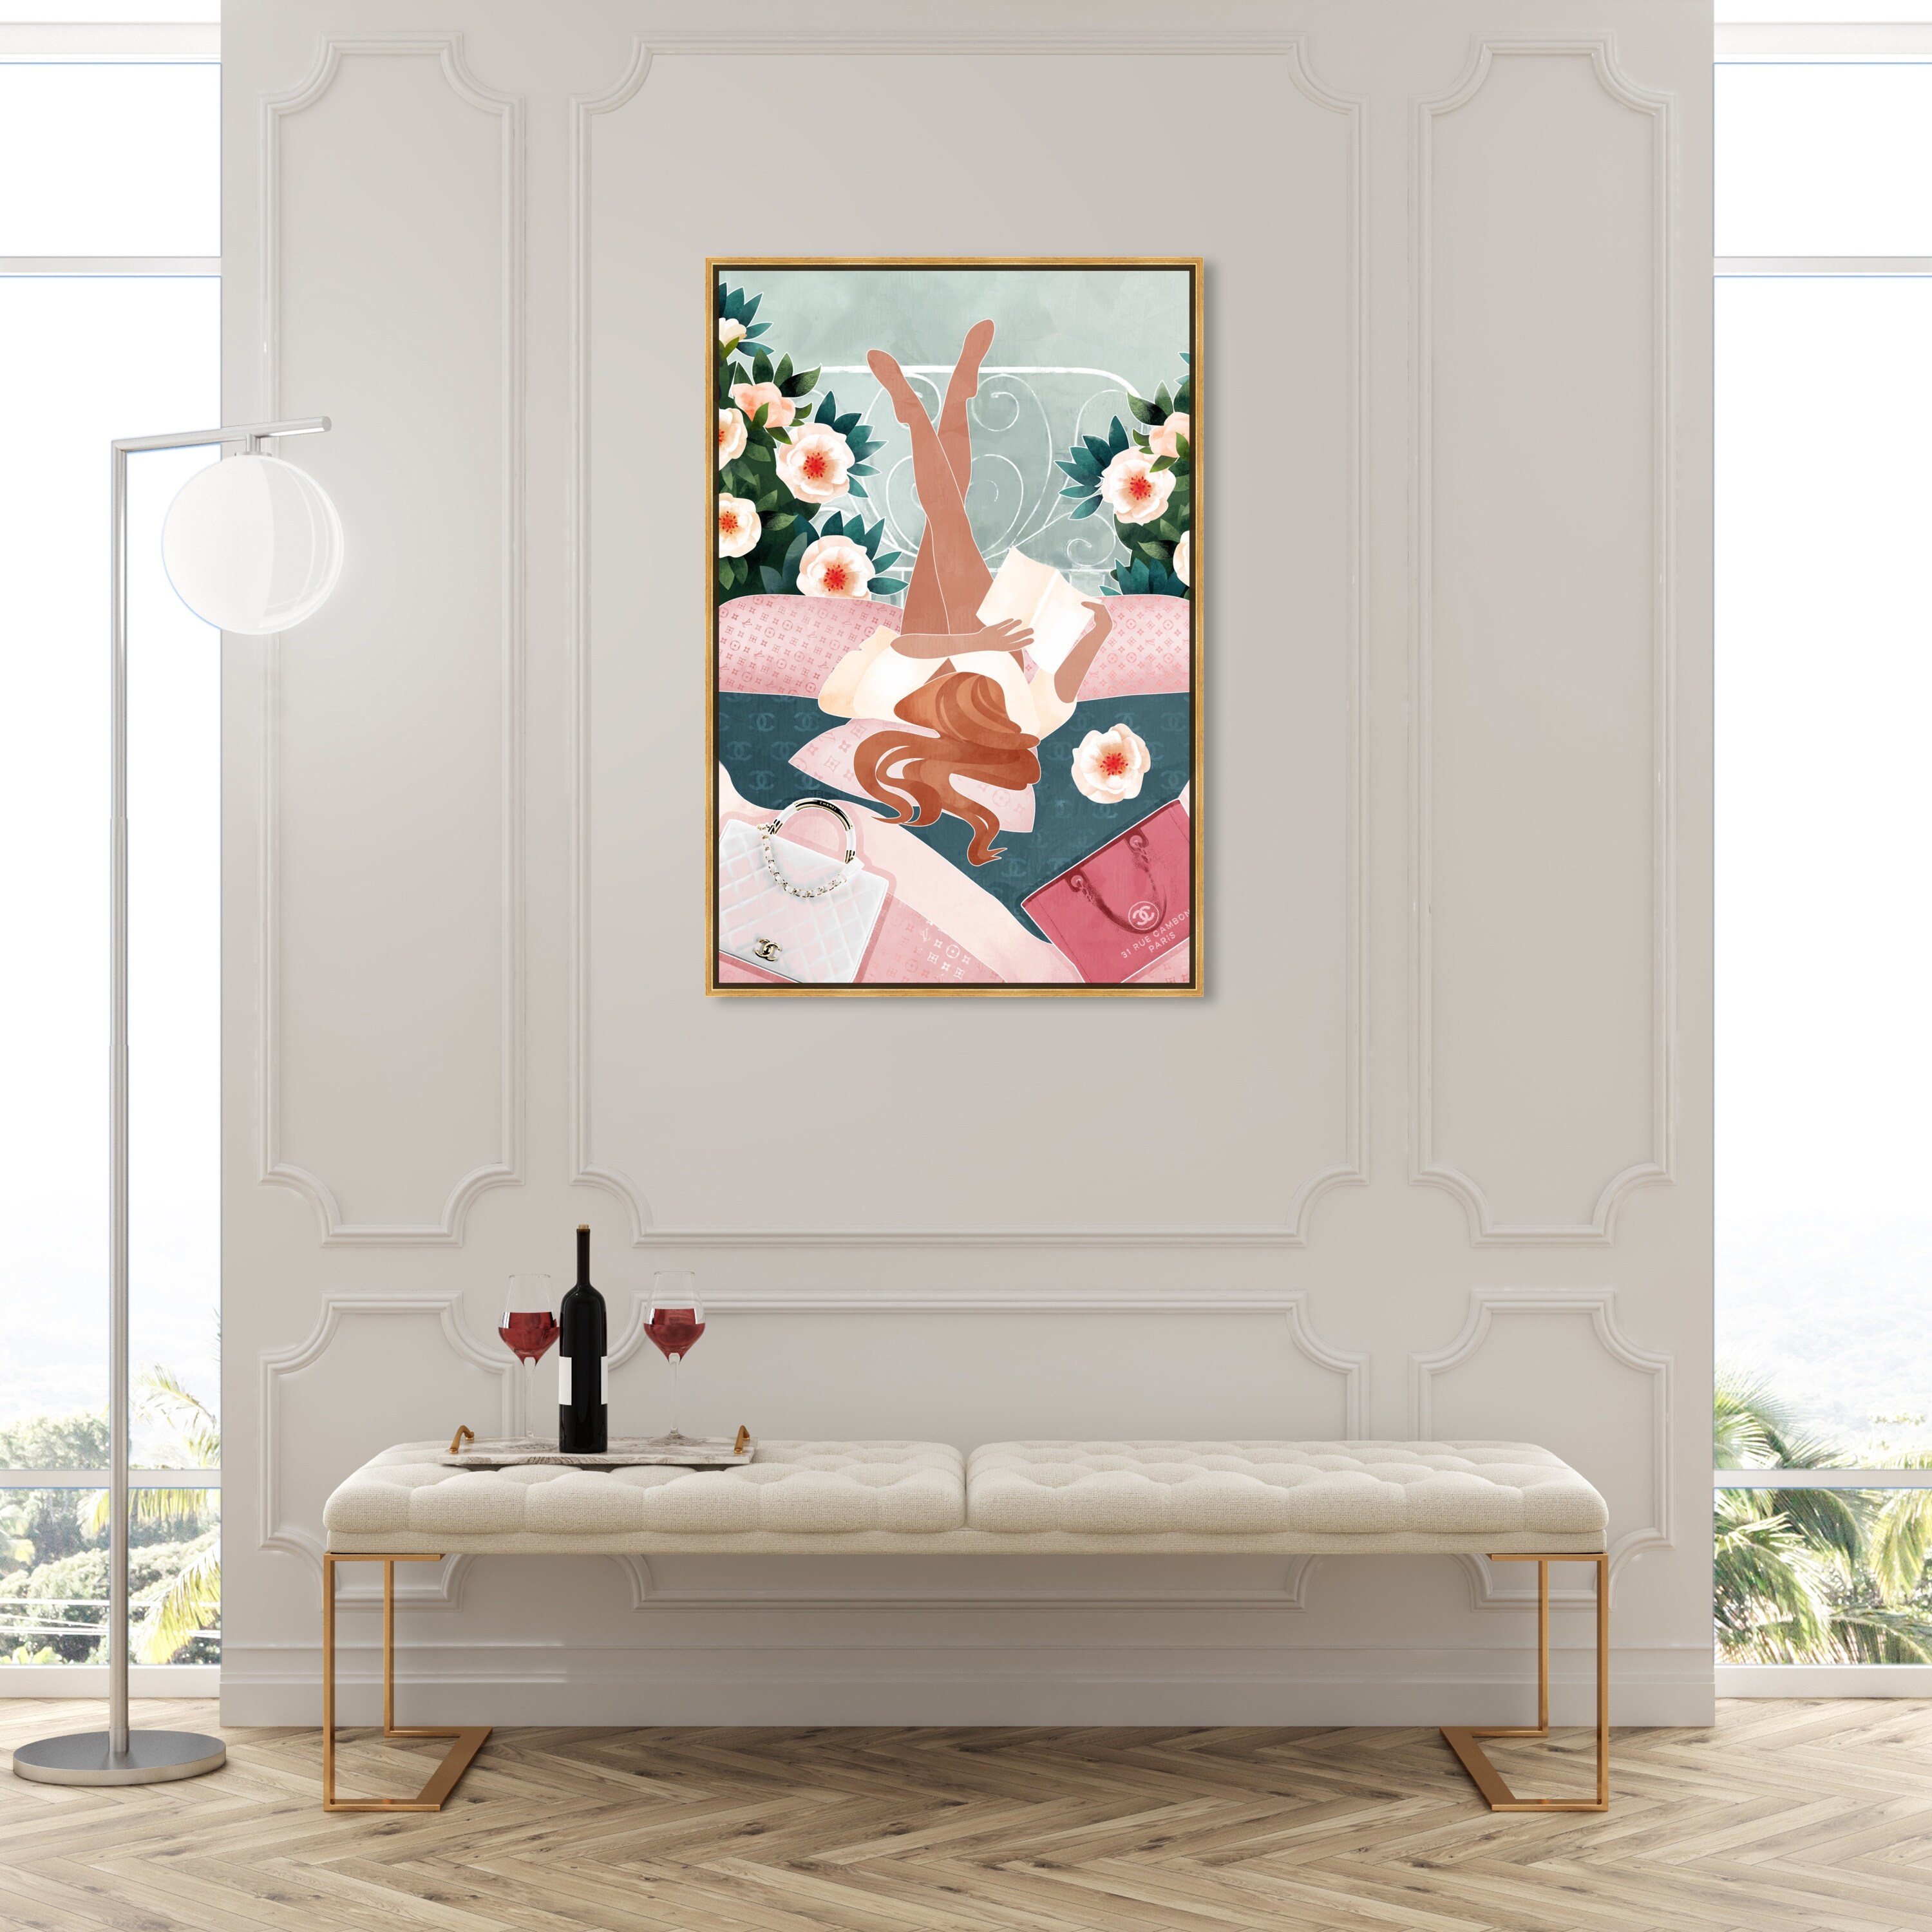  Picture Perfect International Giclee Stretched Wall